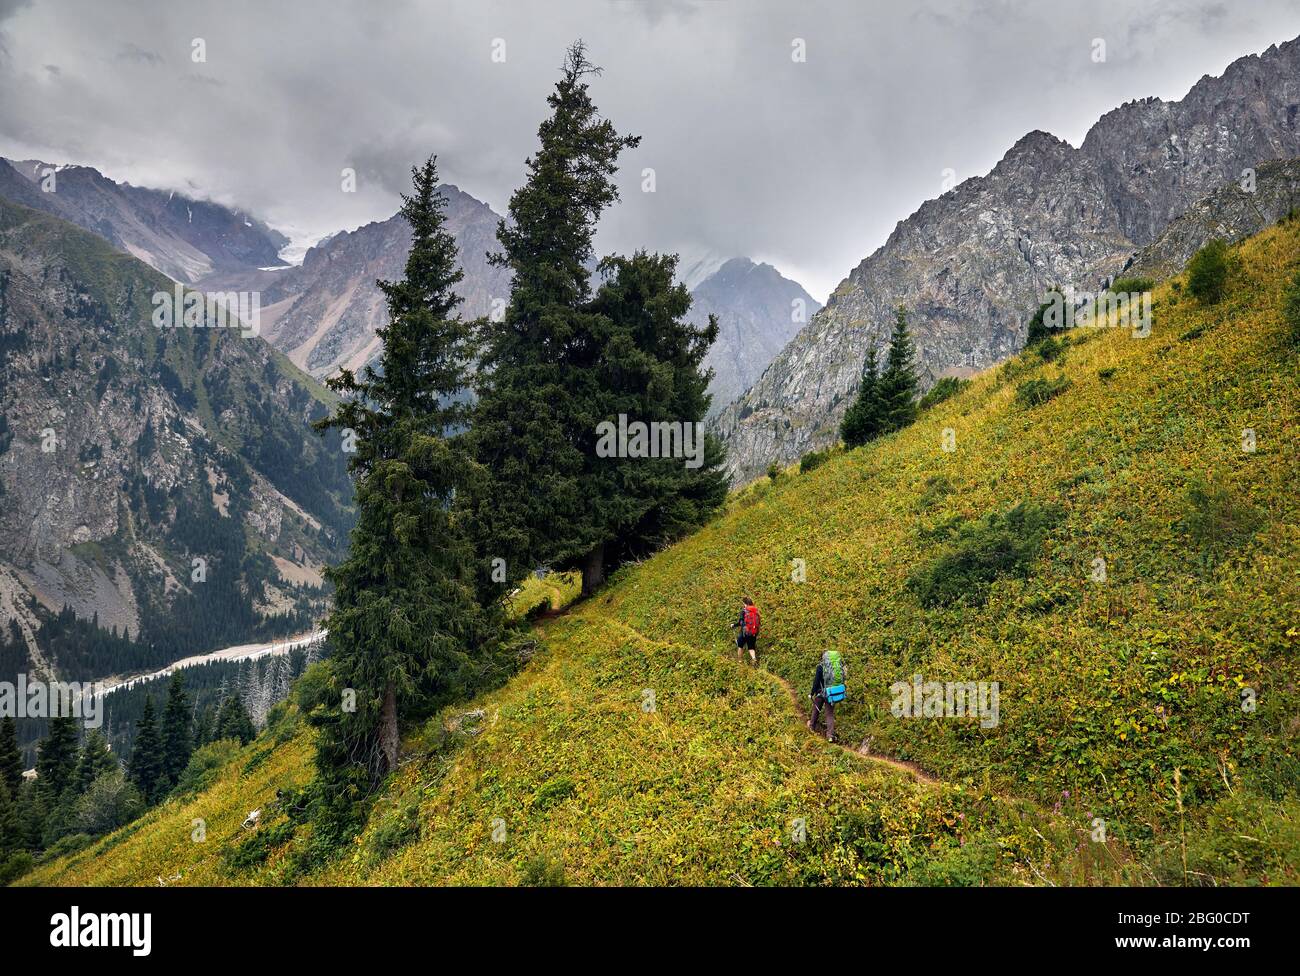 Two tourists with backpacks walking on the trail in the mountain valley at overcast sky background. Travel adventure concept Stock Photo